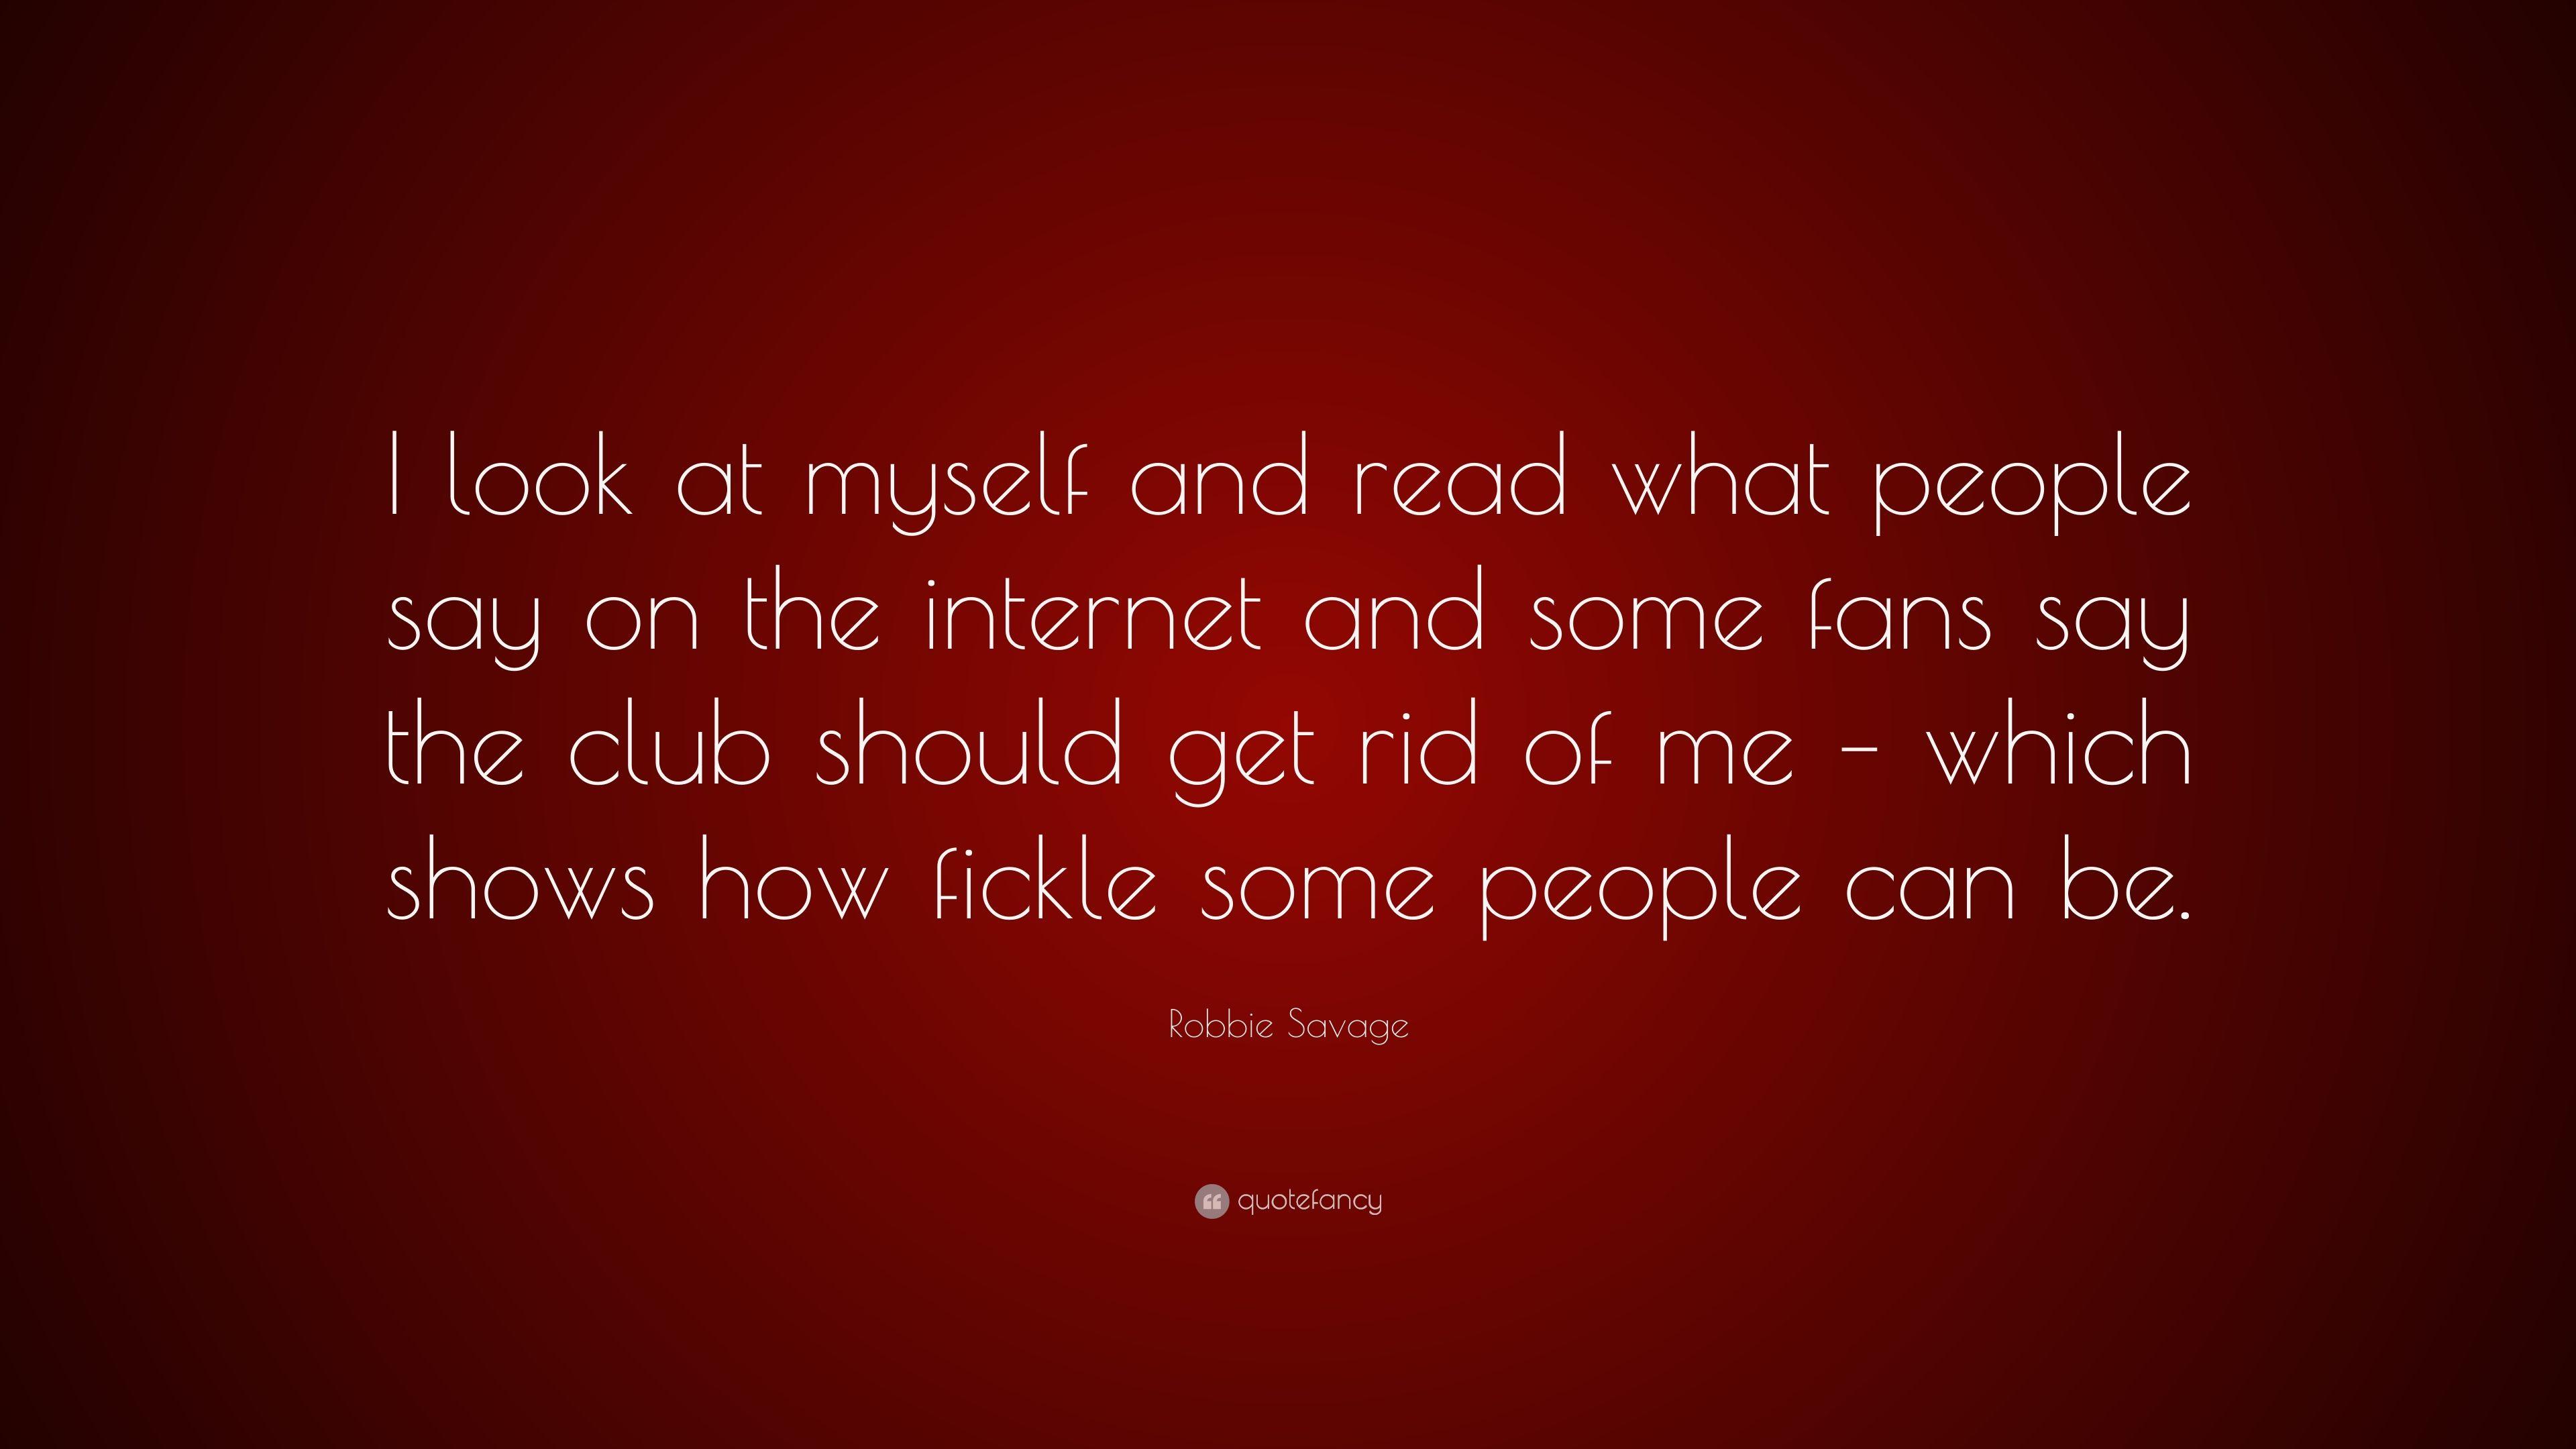 Robbie Savage Quote: “I look at myself and read what people say